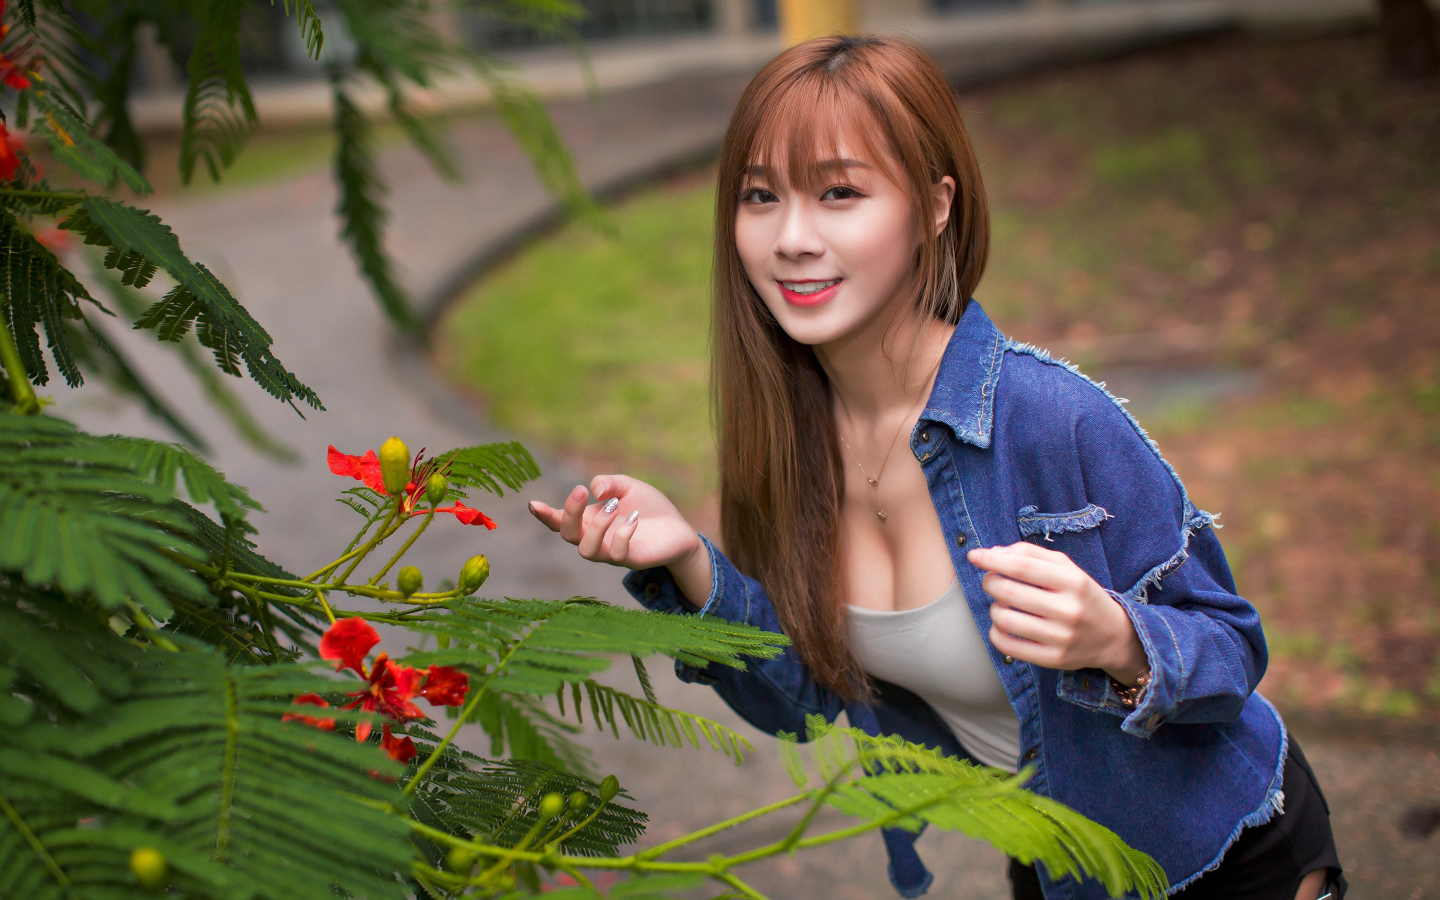 Asian girl standing by a plant with green leaves